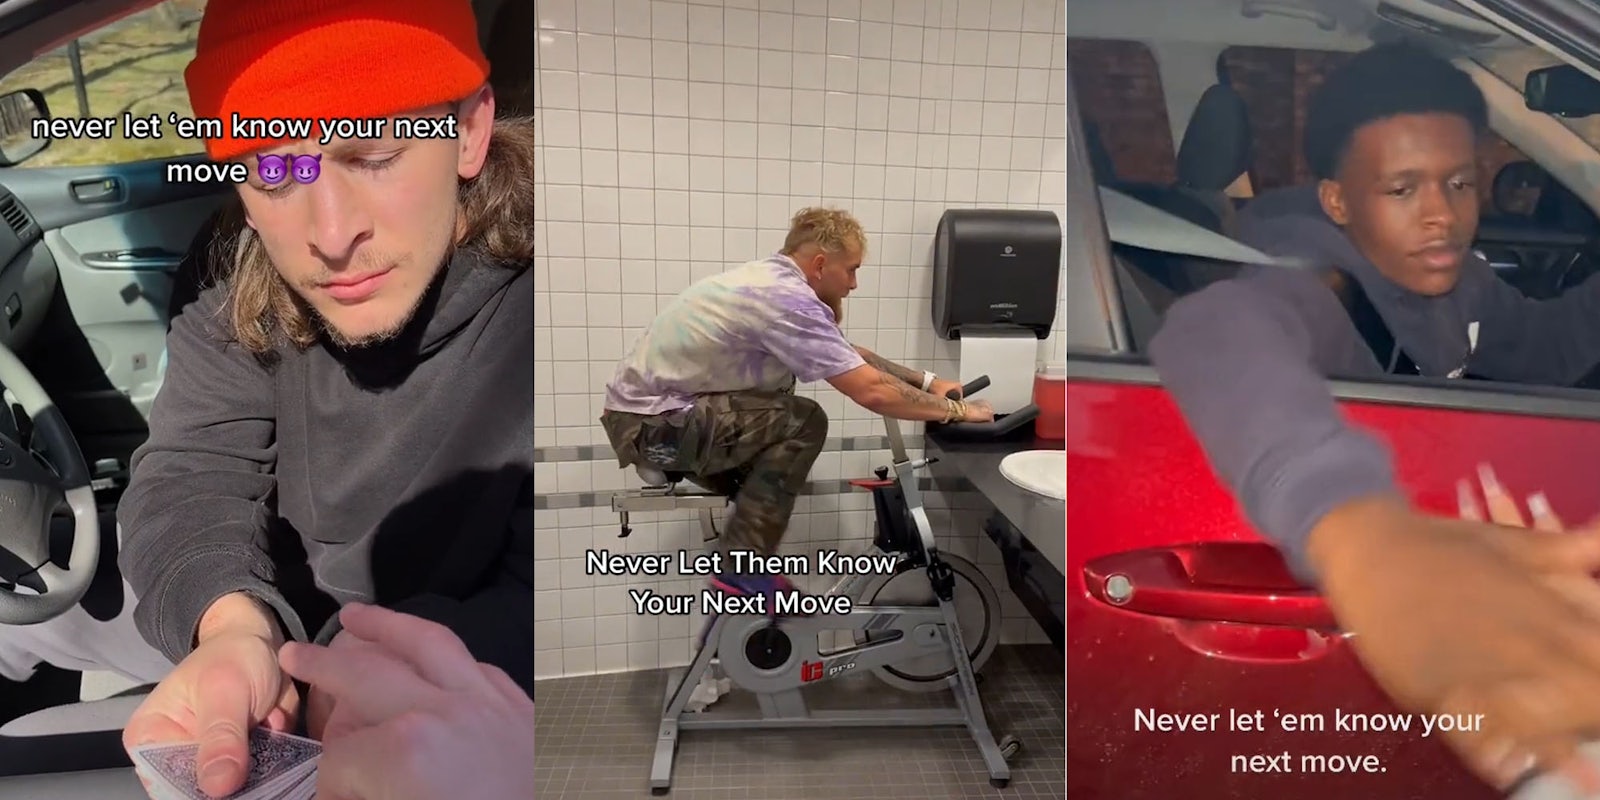 Man in car hands on cards caption 'Never let them know your next move' (l) Logan Paul on exercise machine in bathroom caption 'Never let them know your next move' (c) man in car holding woman's hand caption 'Never let them know your next move' (r)